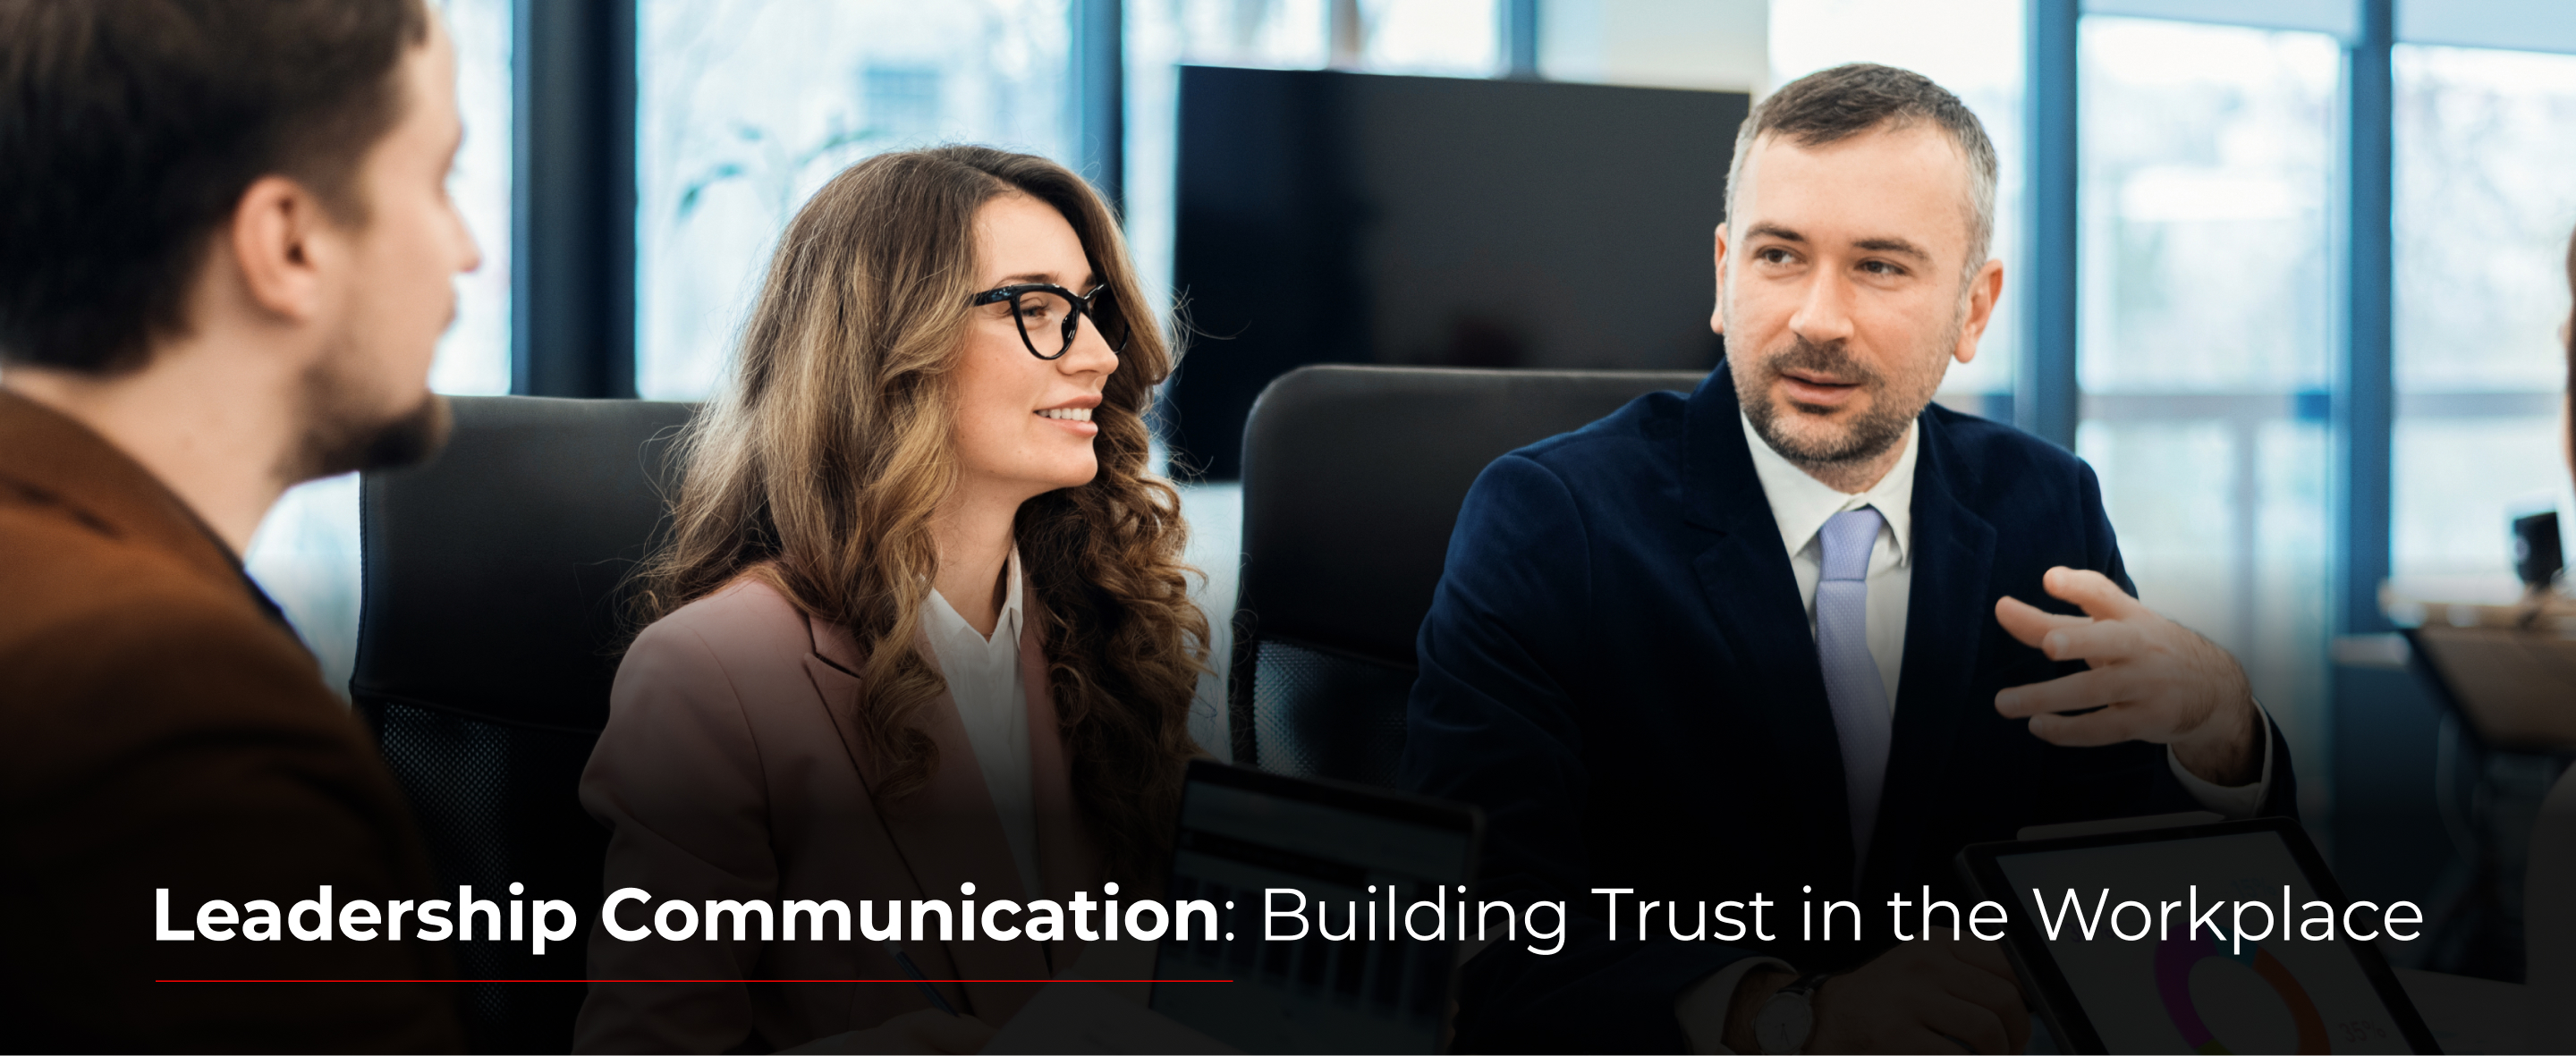 Leadership Communication: Building Trust in the Workplace